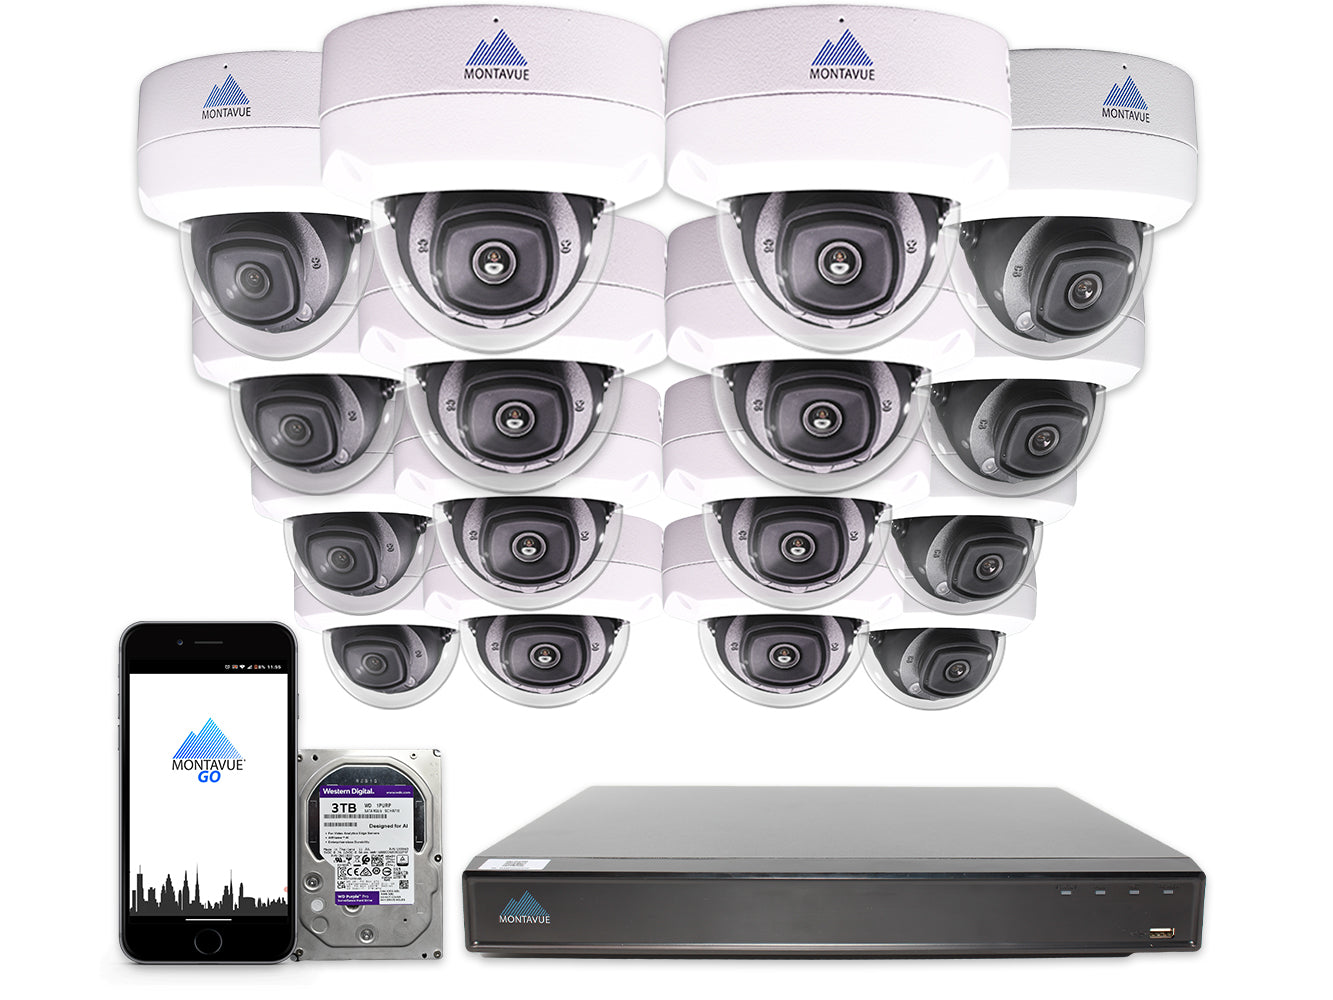 MTD8110 Package | 4K Acupick Vandal-Proof Dome Cameras and 16 Channel 5 Series AI NVR with 3TB HDD - Montavue